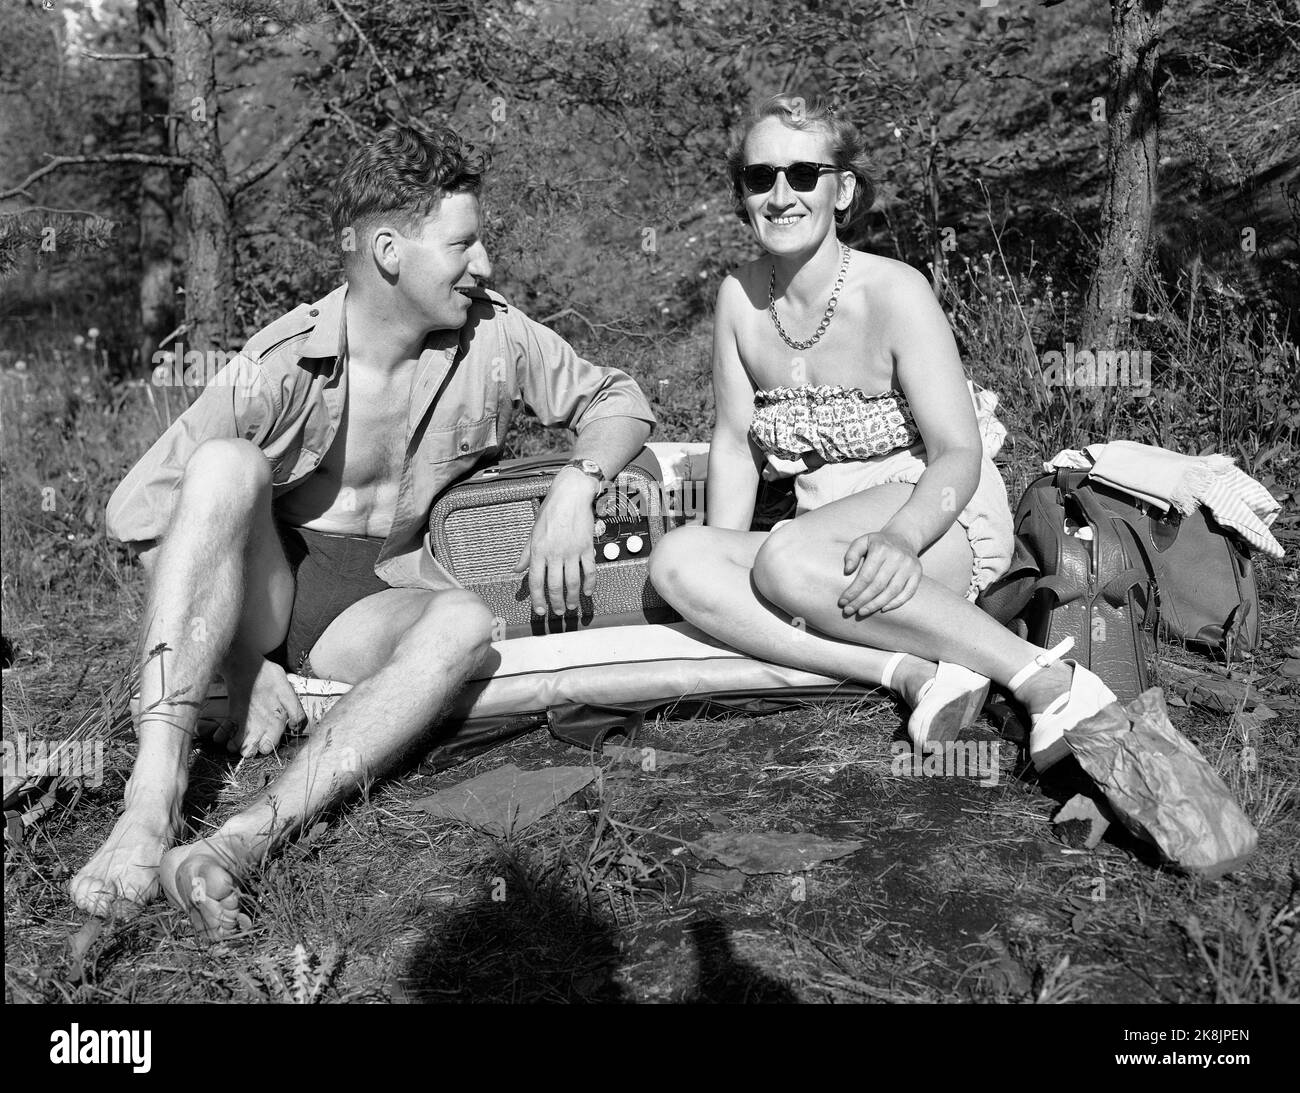 Oslo in the summer of 1951 out on tour, never mad! NTB staff on land / camping. The travel radio of brand Kurer was an indispensable companion on the camping trip. Photo: NTB / NTB Oslo, Summer of 1951. Employees of Norwegian Telegraph Bureau (NTB) camping. The Travel Radio Model Kurer was indispensable Company. Photo: NTB/ NTB Stock Photo